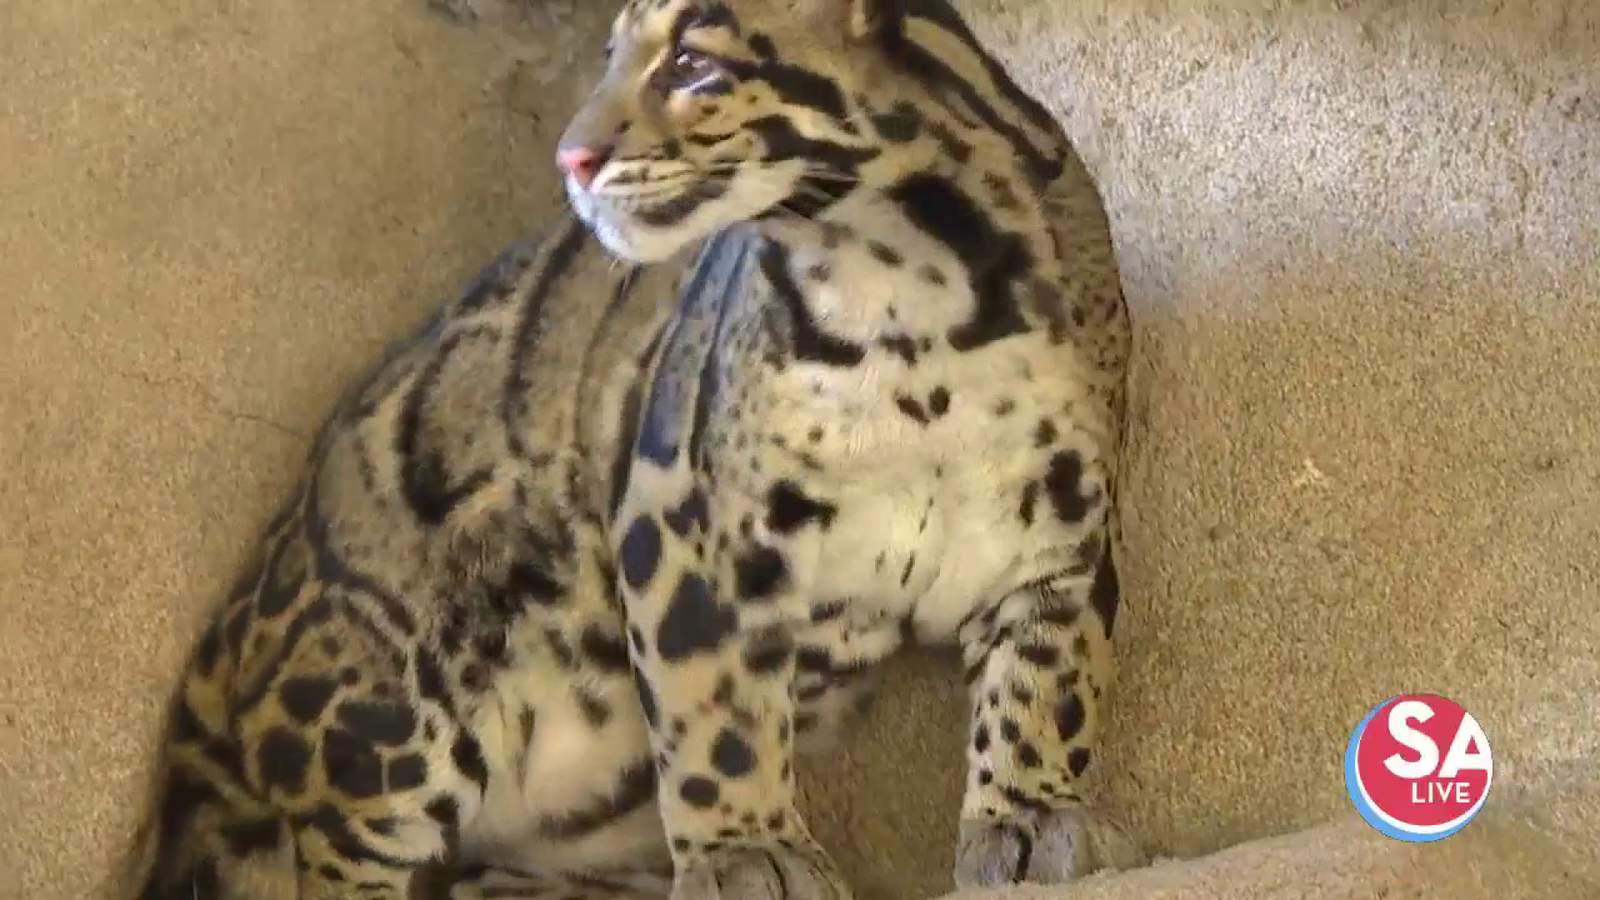 Have a ‘roaring’ good time with these clouded leopards